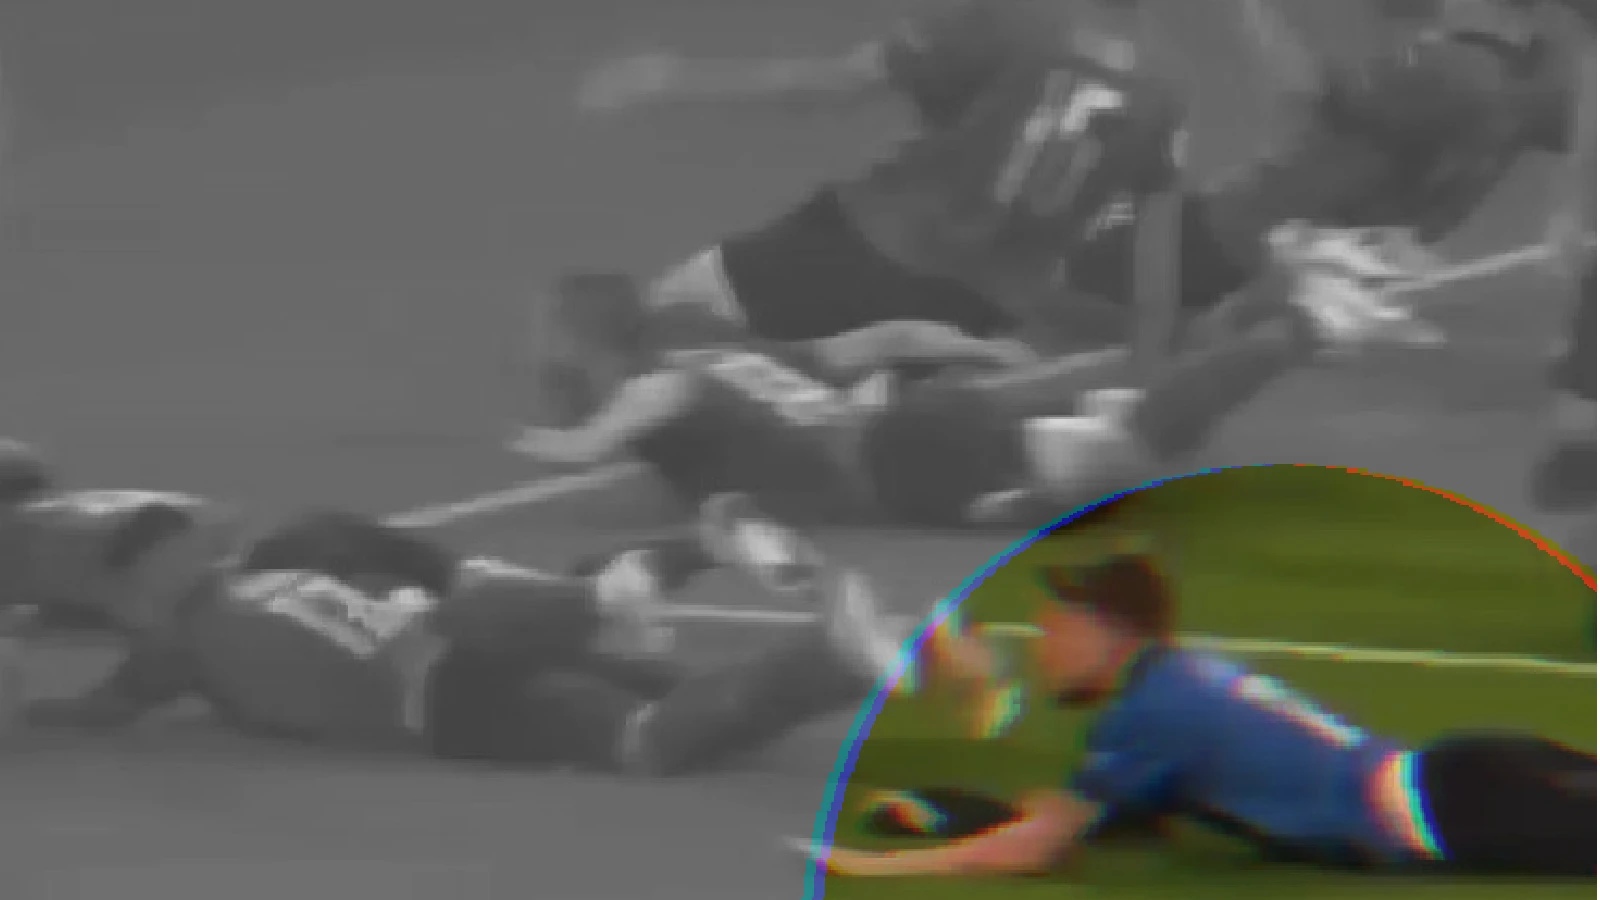 Ciro Immobile dragged his shorts off while doing the slide to celebrate after Italy's win v England